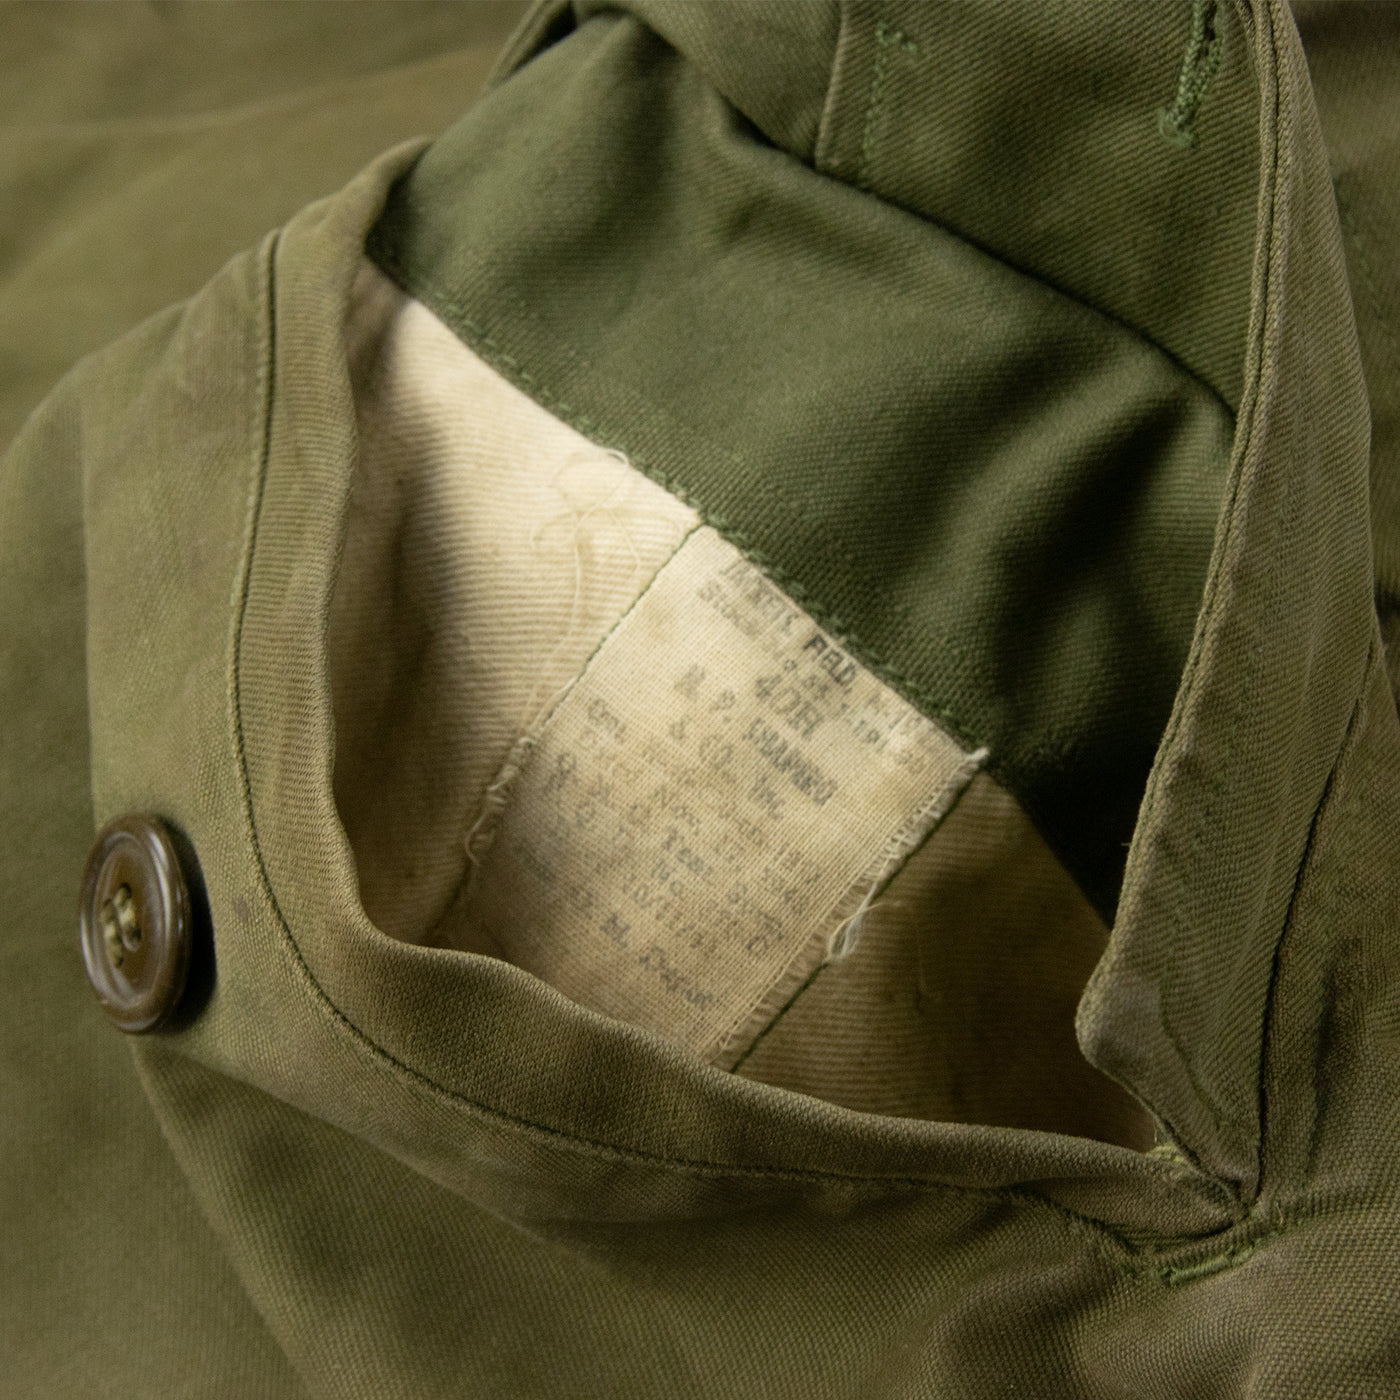 Vintage 1940s M-1943 US Army WWII Military Field Jacket Olive Green - M Tag